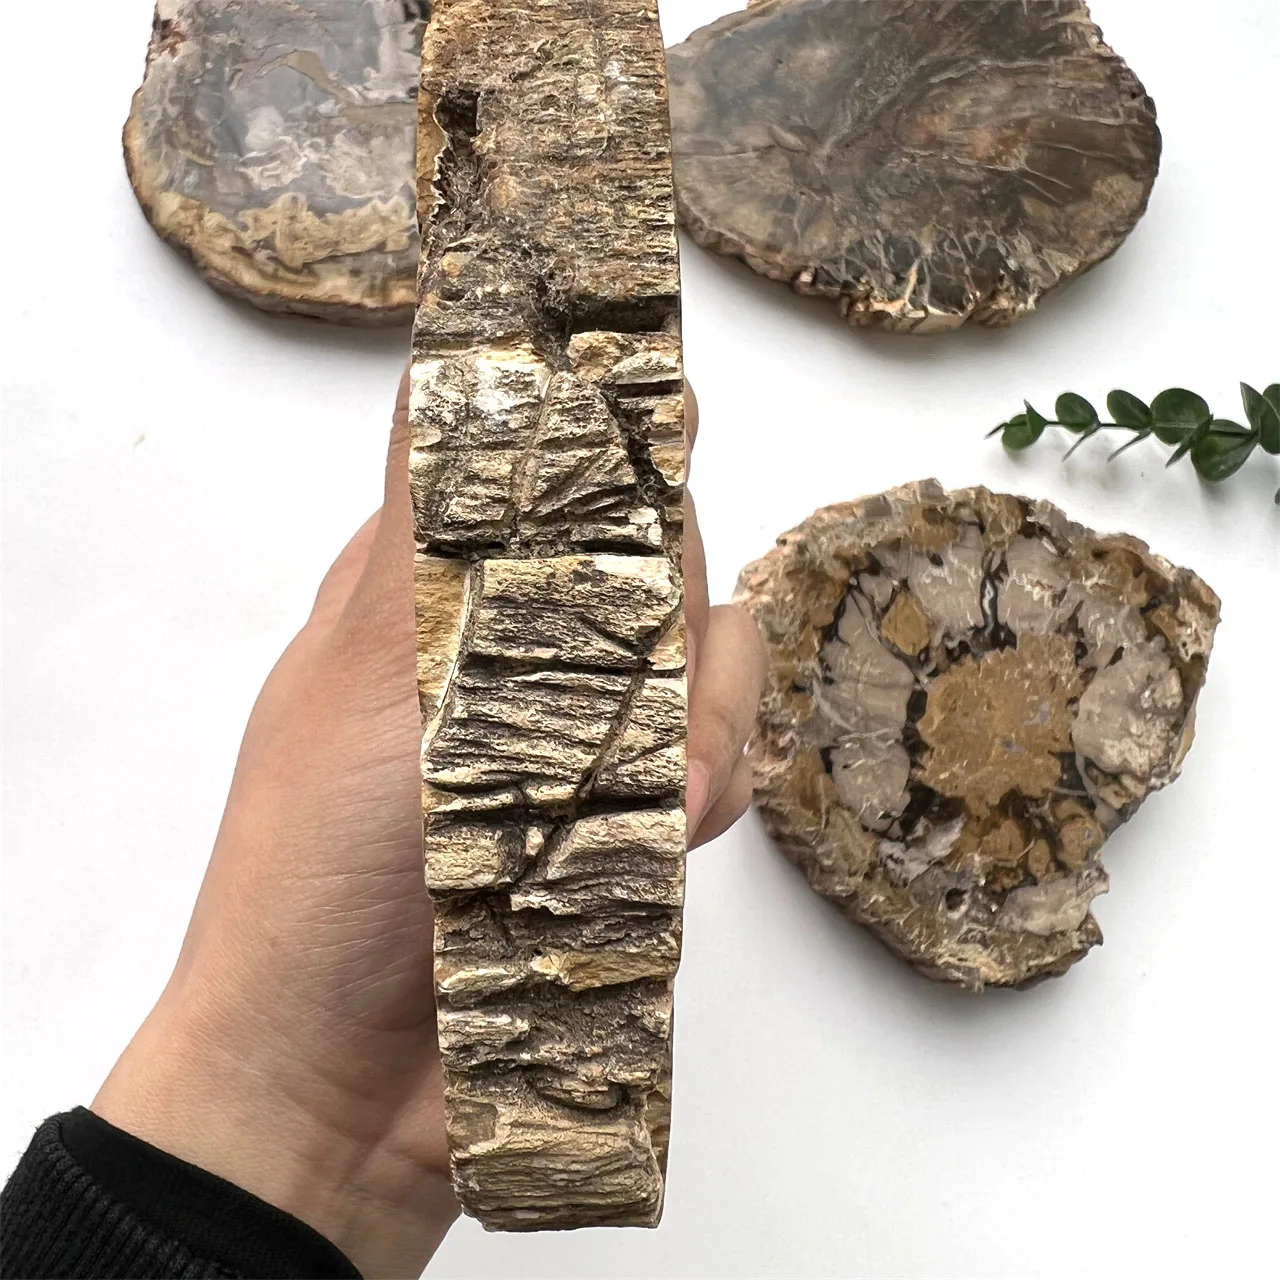 

Wholesale Natural Crystal Polished Specimen Han Petrified Wood Piece Plate Wood Fossil Slab Rough Stone Slice